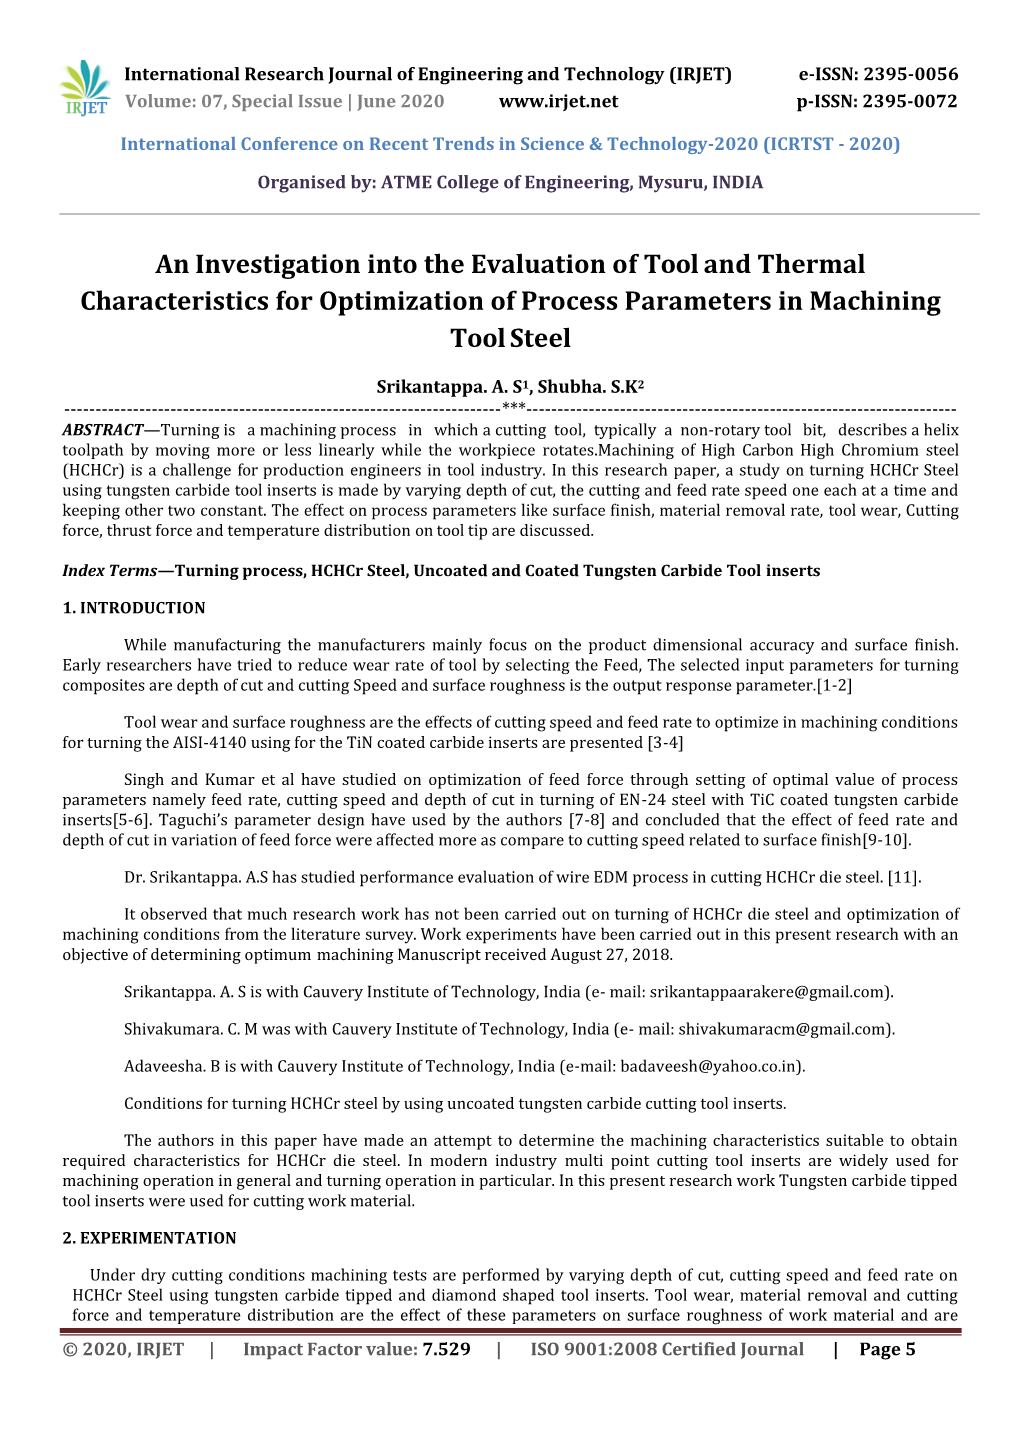 An Investigation Into the Evaluation of Tool and Thermal Characteristics for Optimization of Process Parameters in Machining Tool Steel